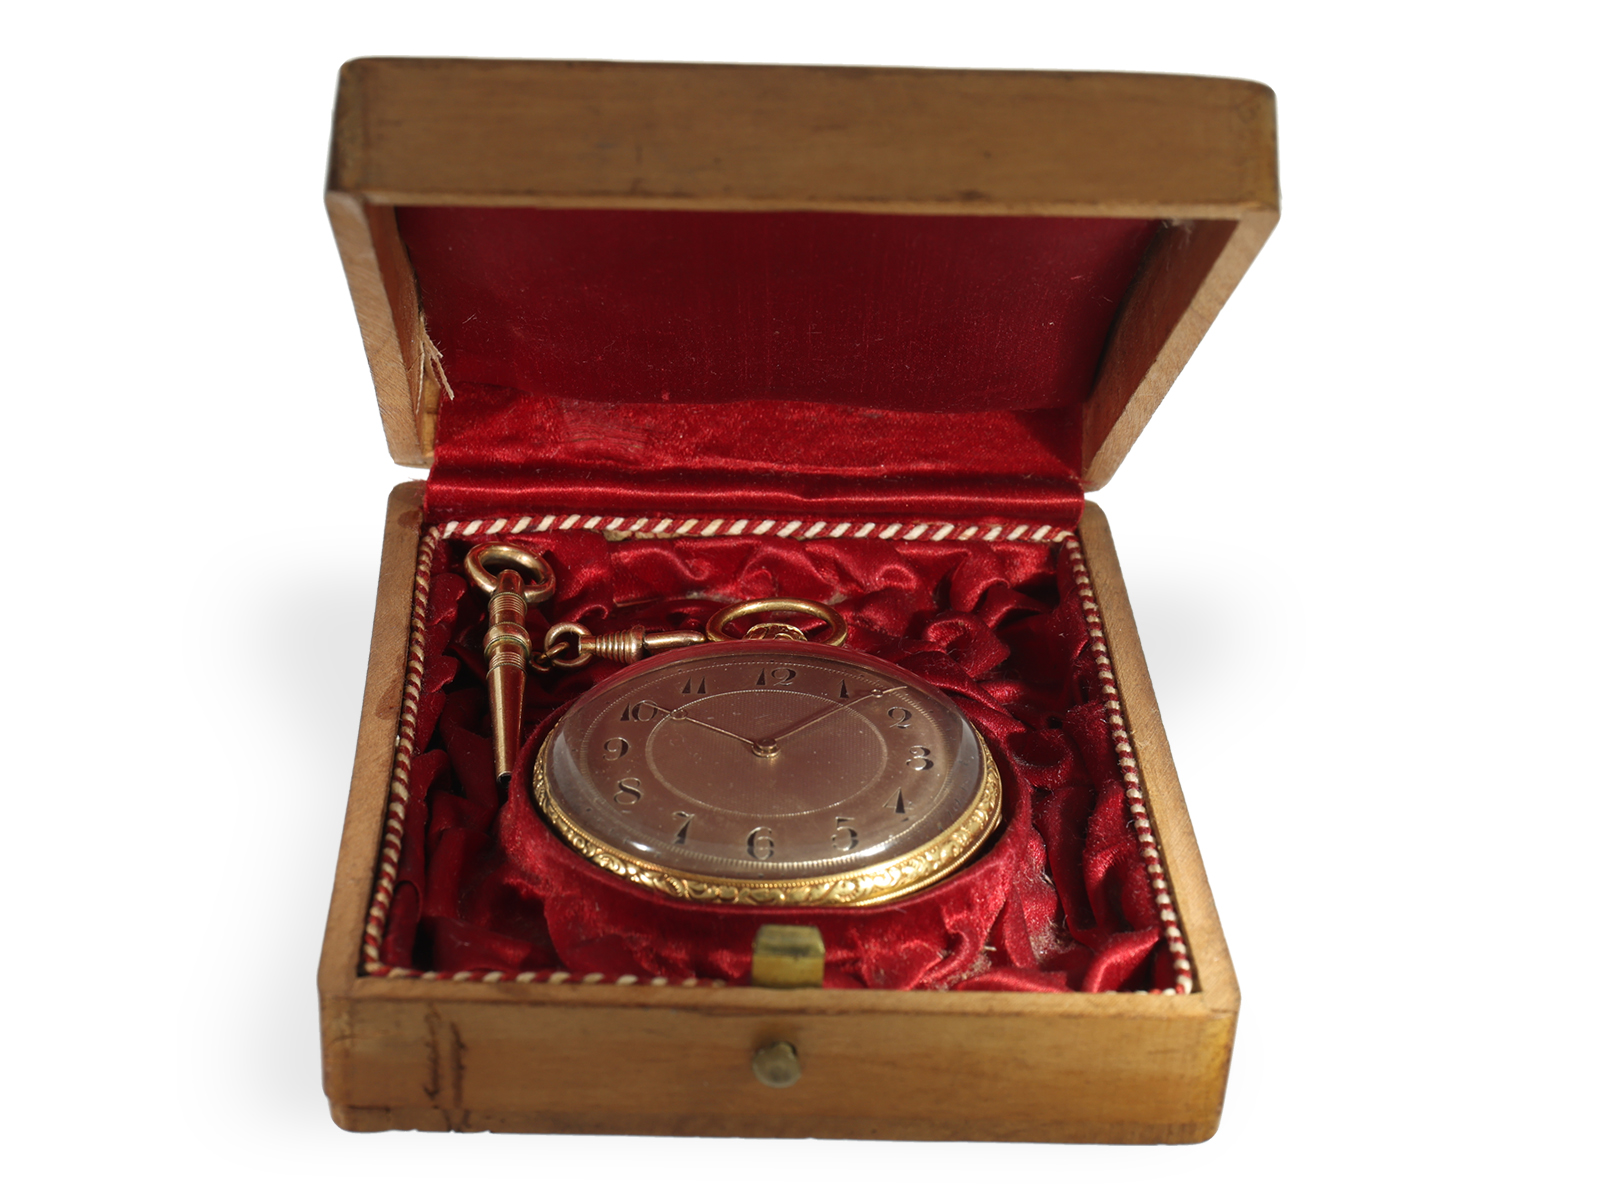 Pocket watch: very rare ladies' pocket watch with repeater, Jeannot Droz a Besancon ca. 1850 - Image 3 of 7